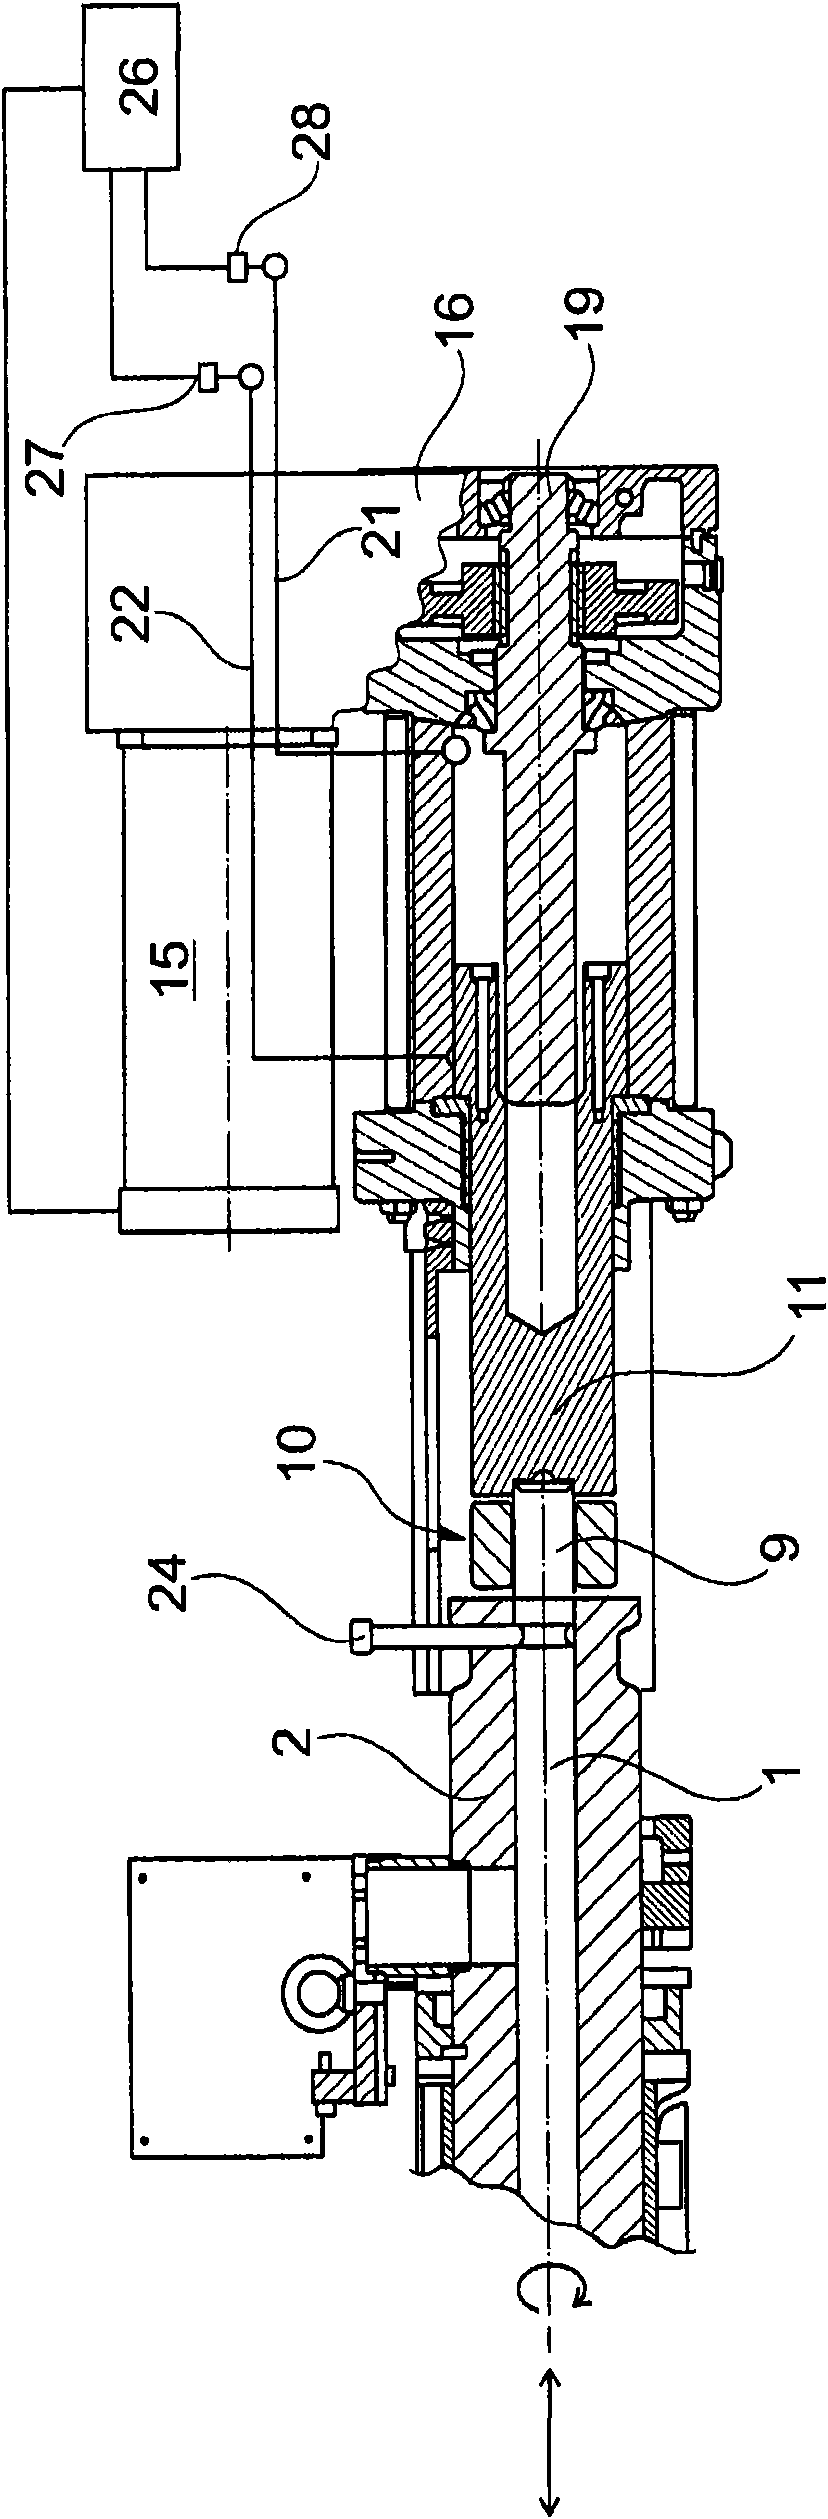 Method and device for the assembly and disassembly of a preplasticizing spindle